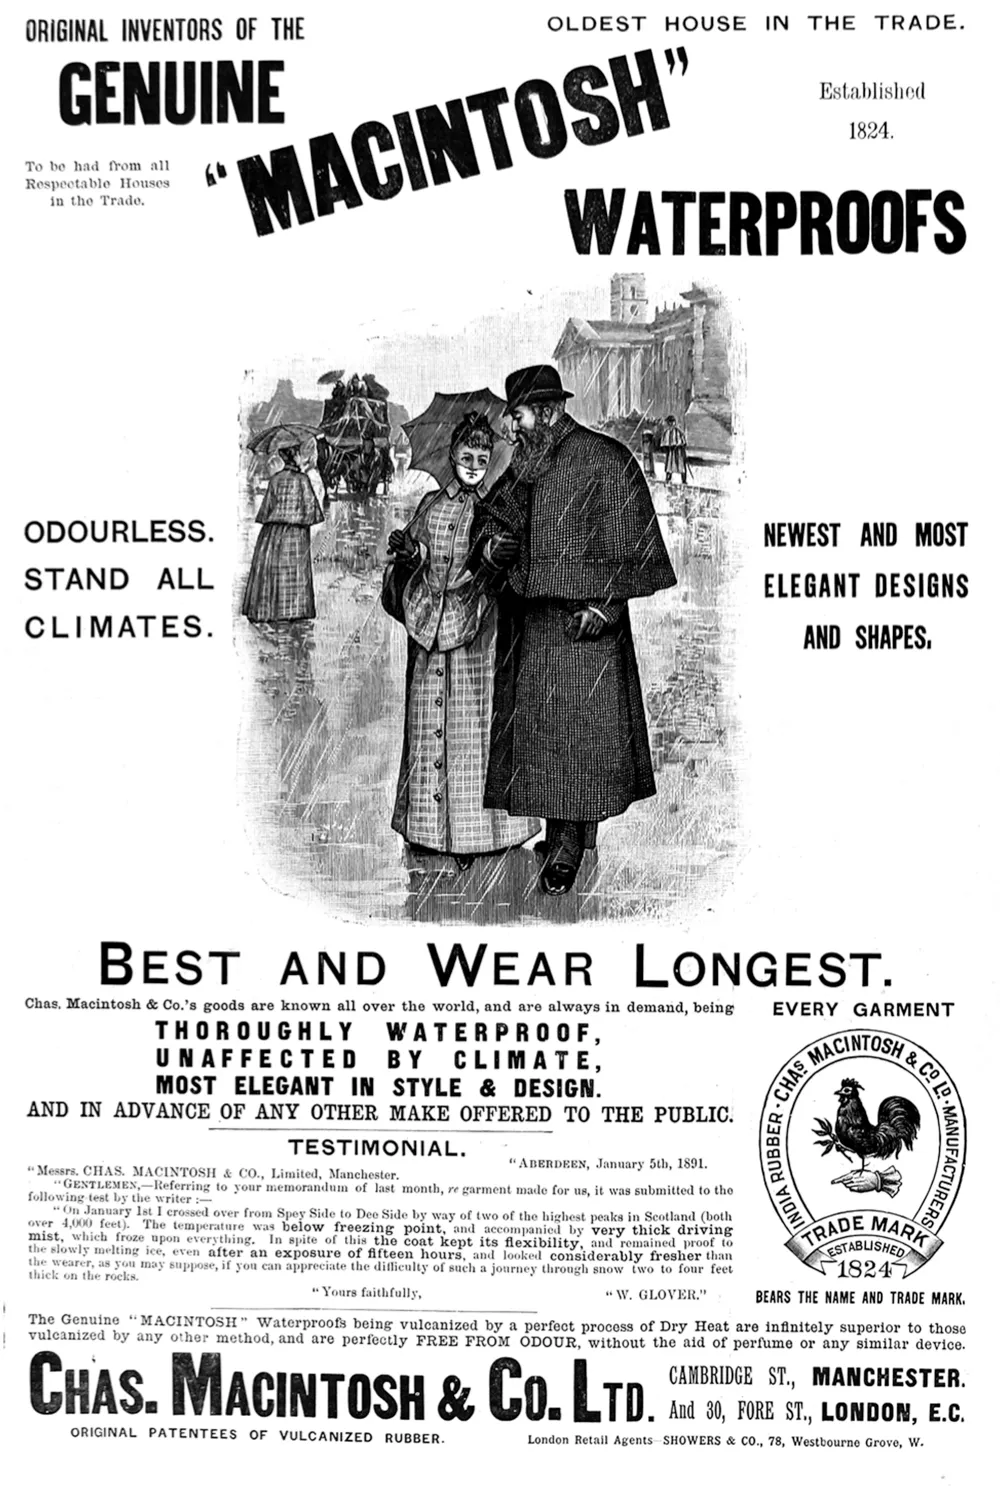 An advertisement for Macintosh waterproofs designed for men and women. 1891